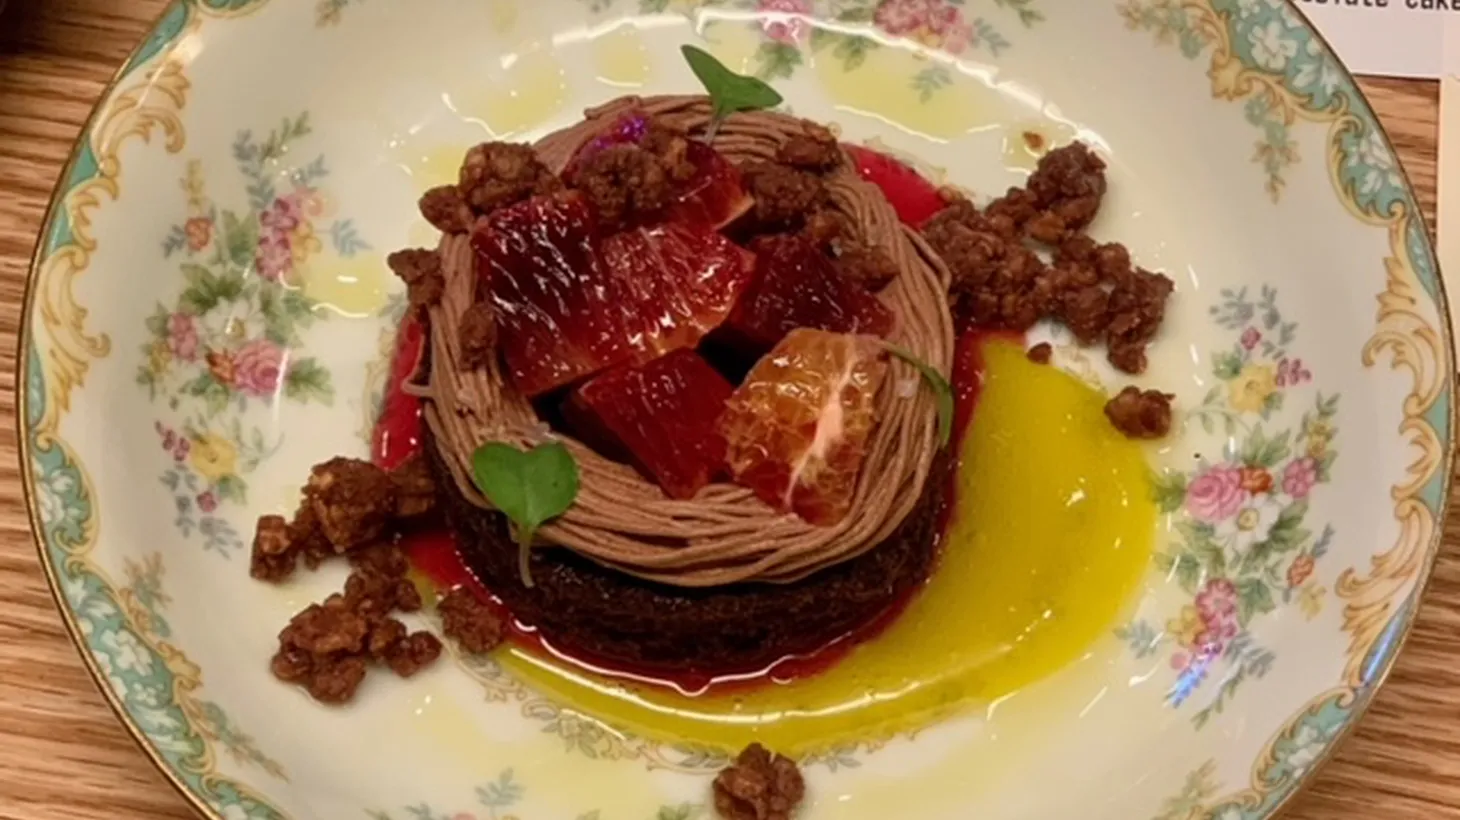 Kirstin Bliss uses tarocco blood oranges for her chocolate brownie dessert at Lingua Franca.